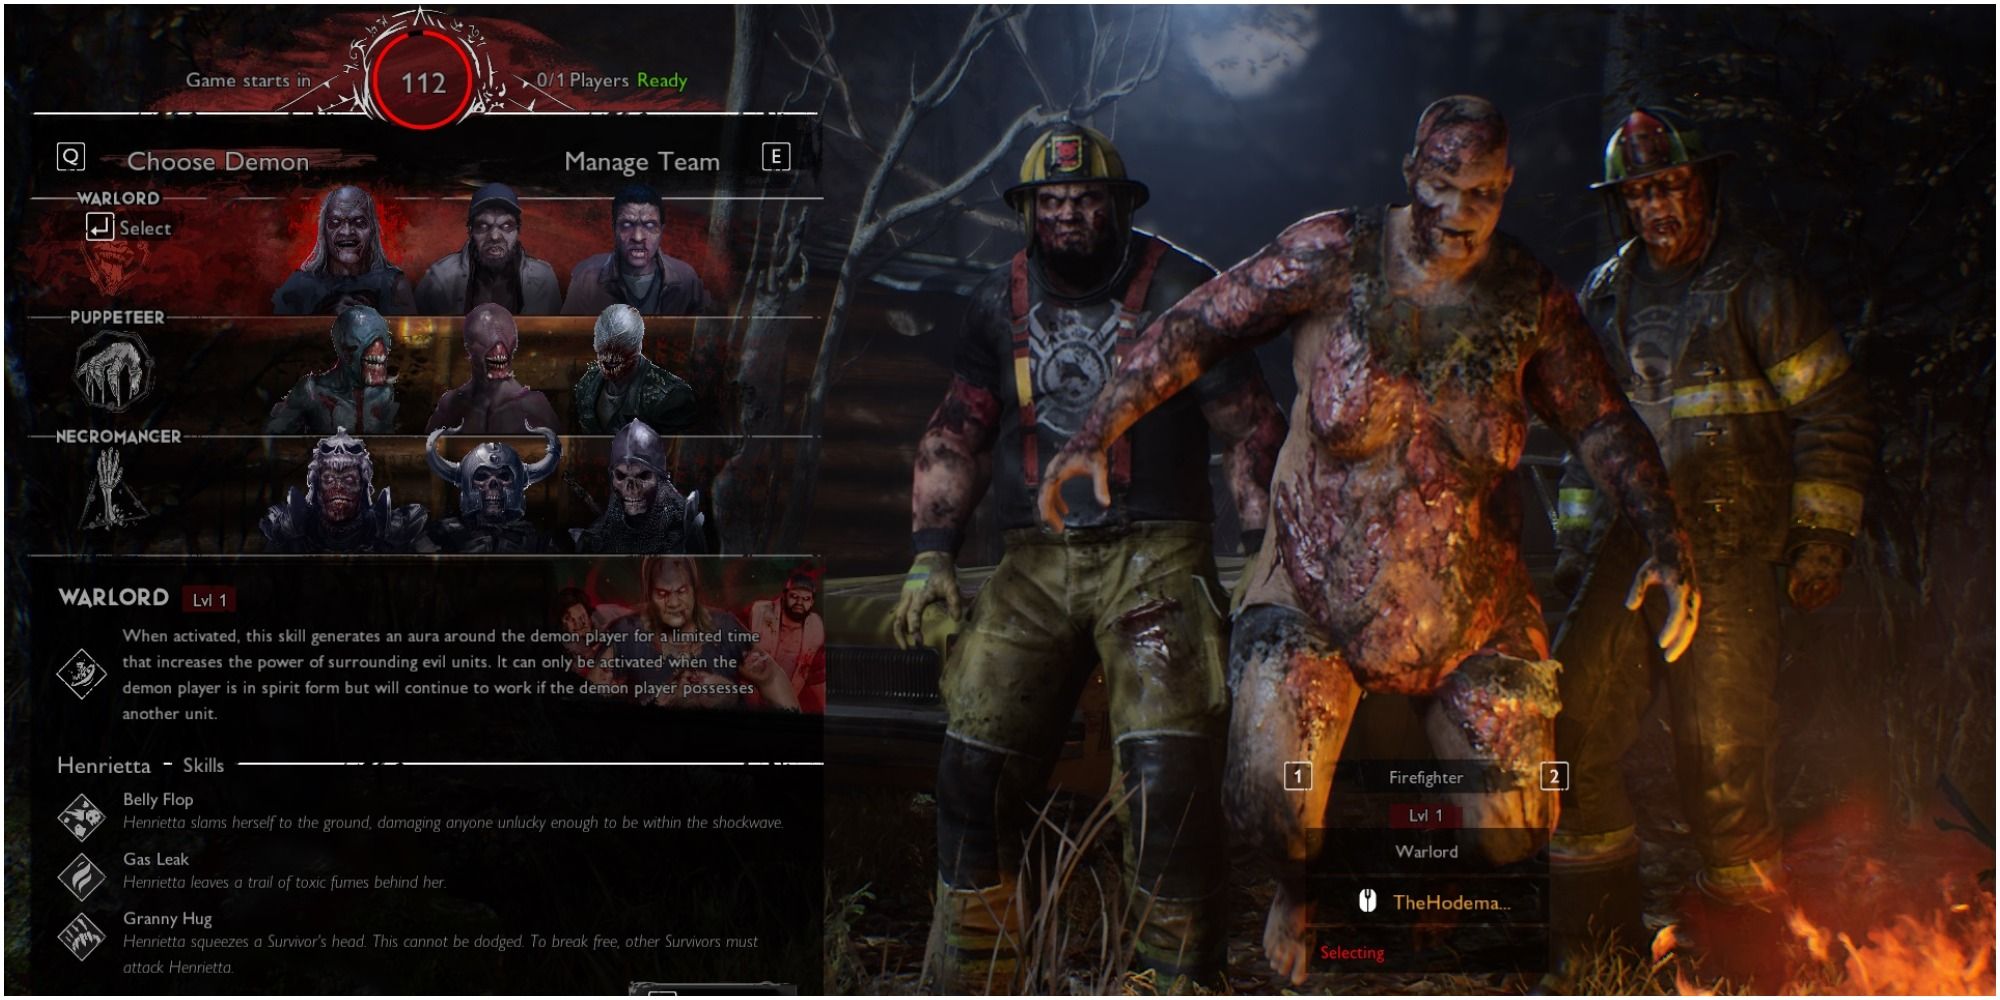 Evil Dead The Game Looking At The Warlord In The Selection Screen